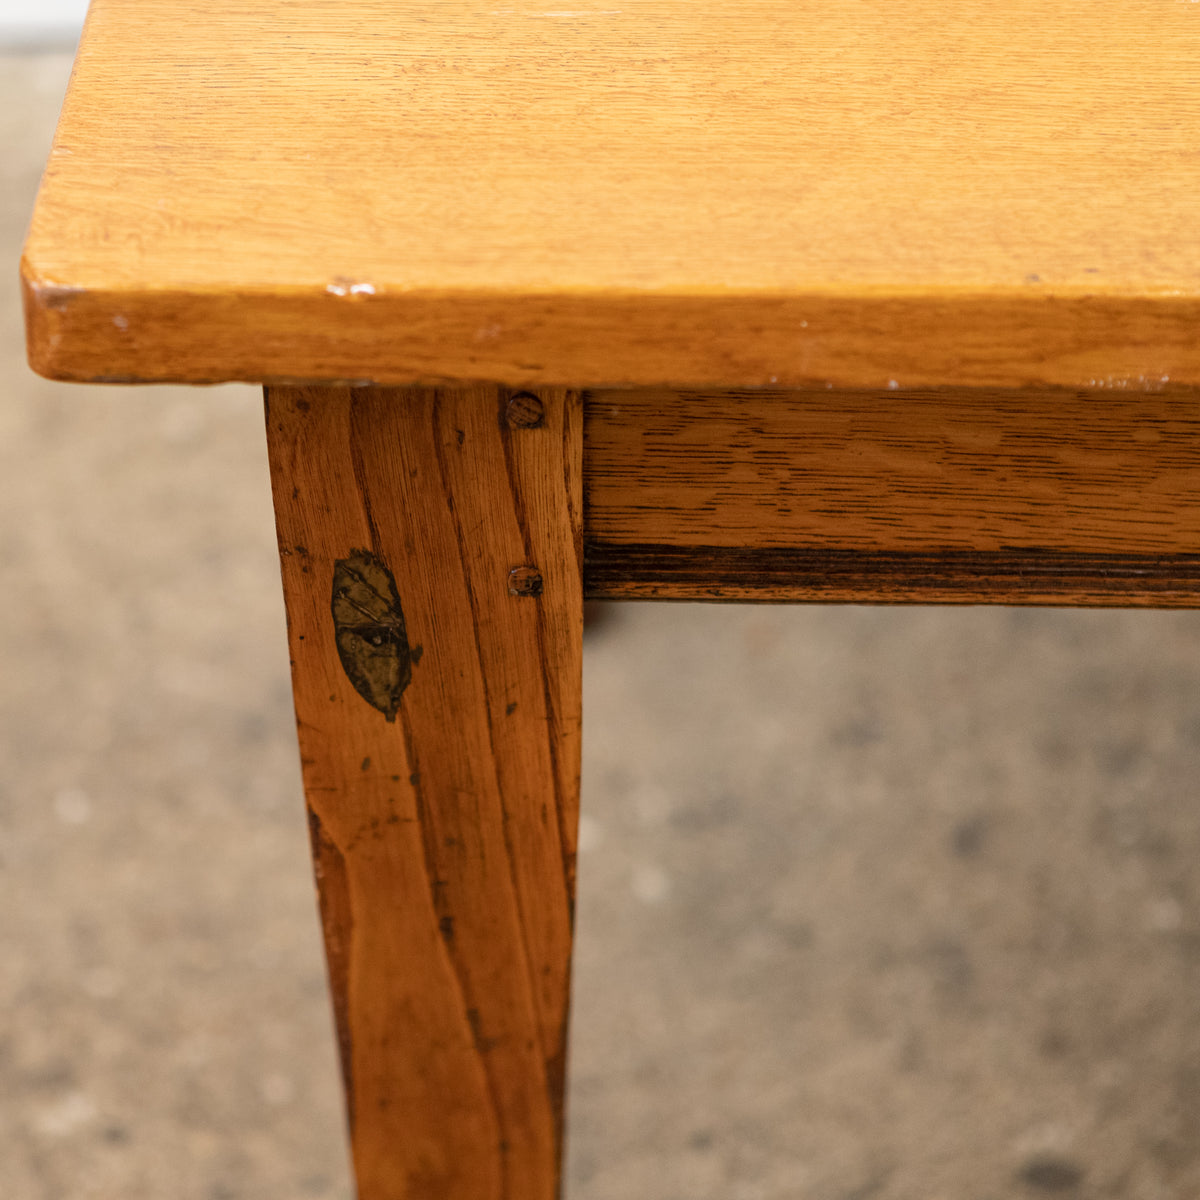 Reclaimed Large Oak Table | The Architectural Forum